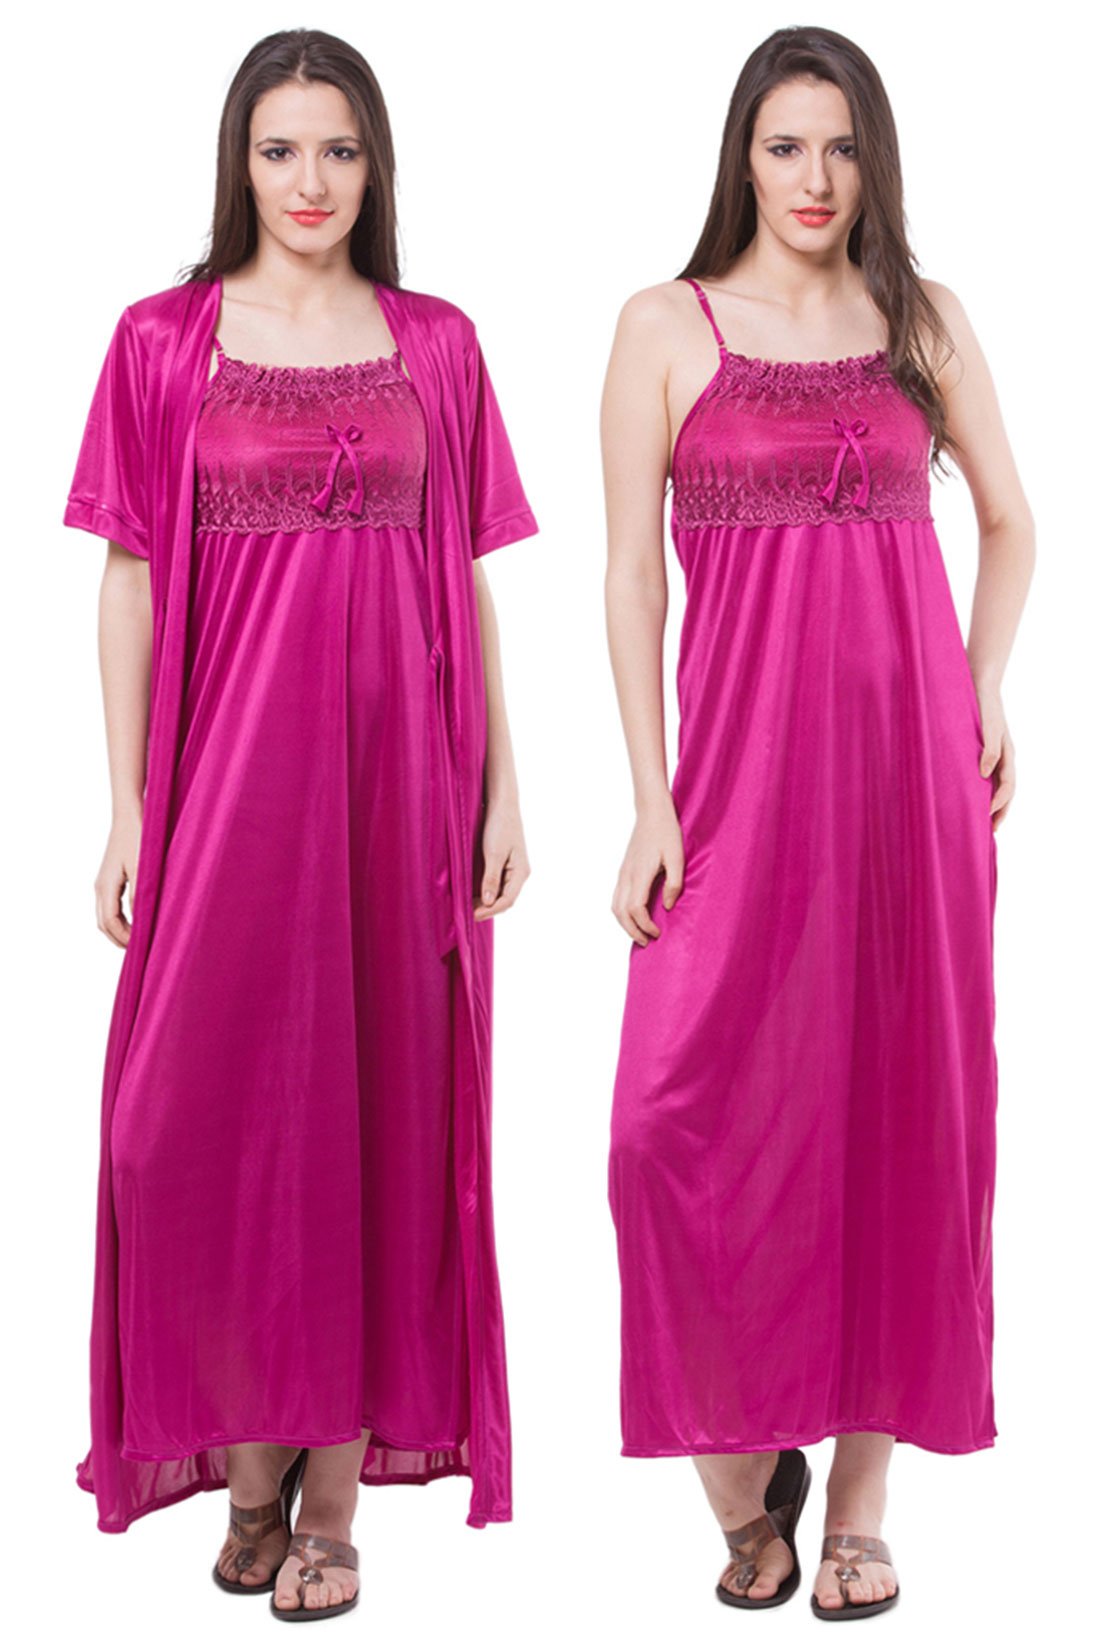 Wine / One Size Aria Satin Nightdress and Robe Clearance The Orange Tags